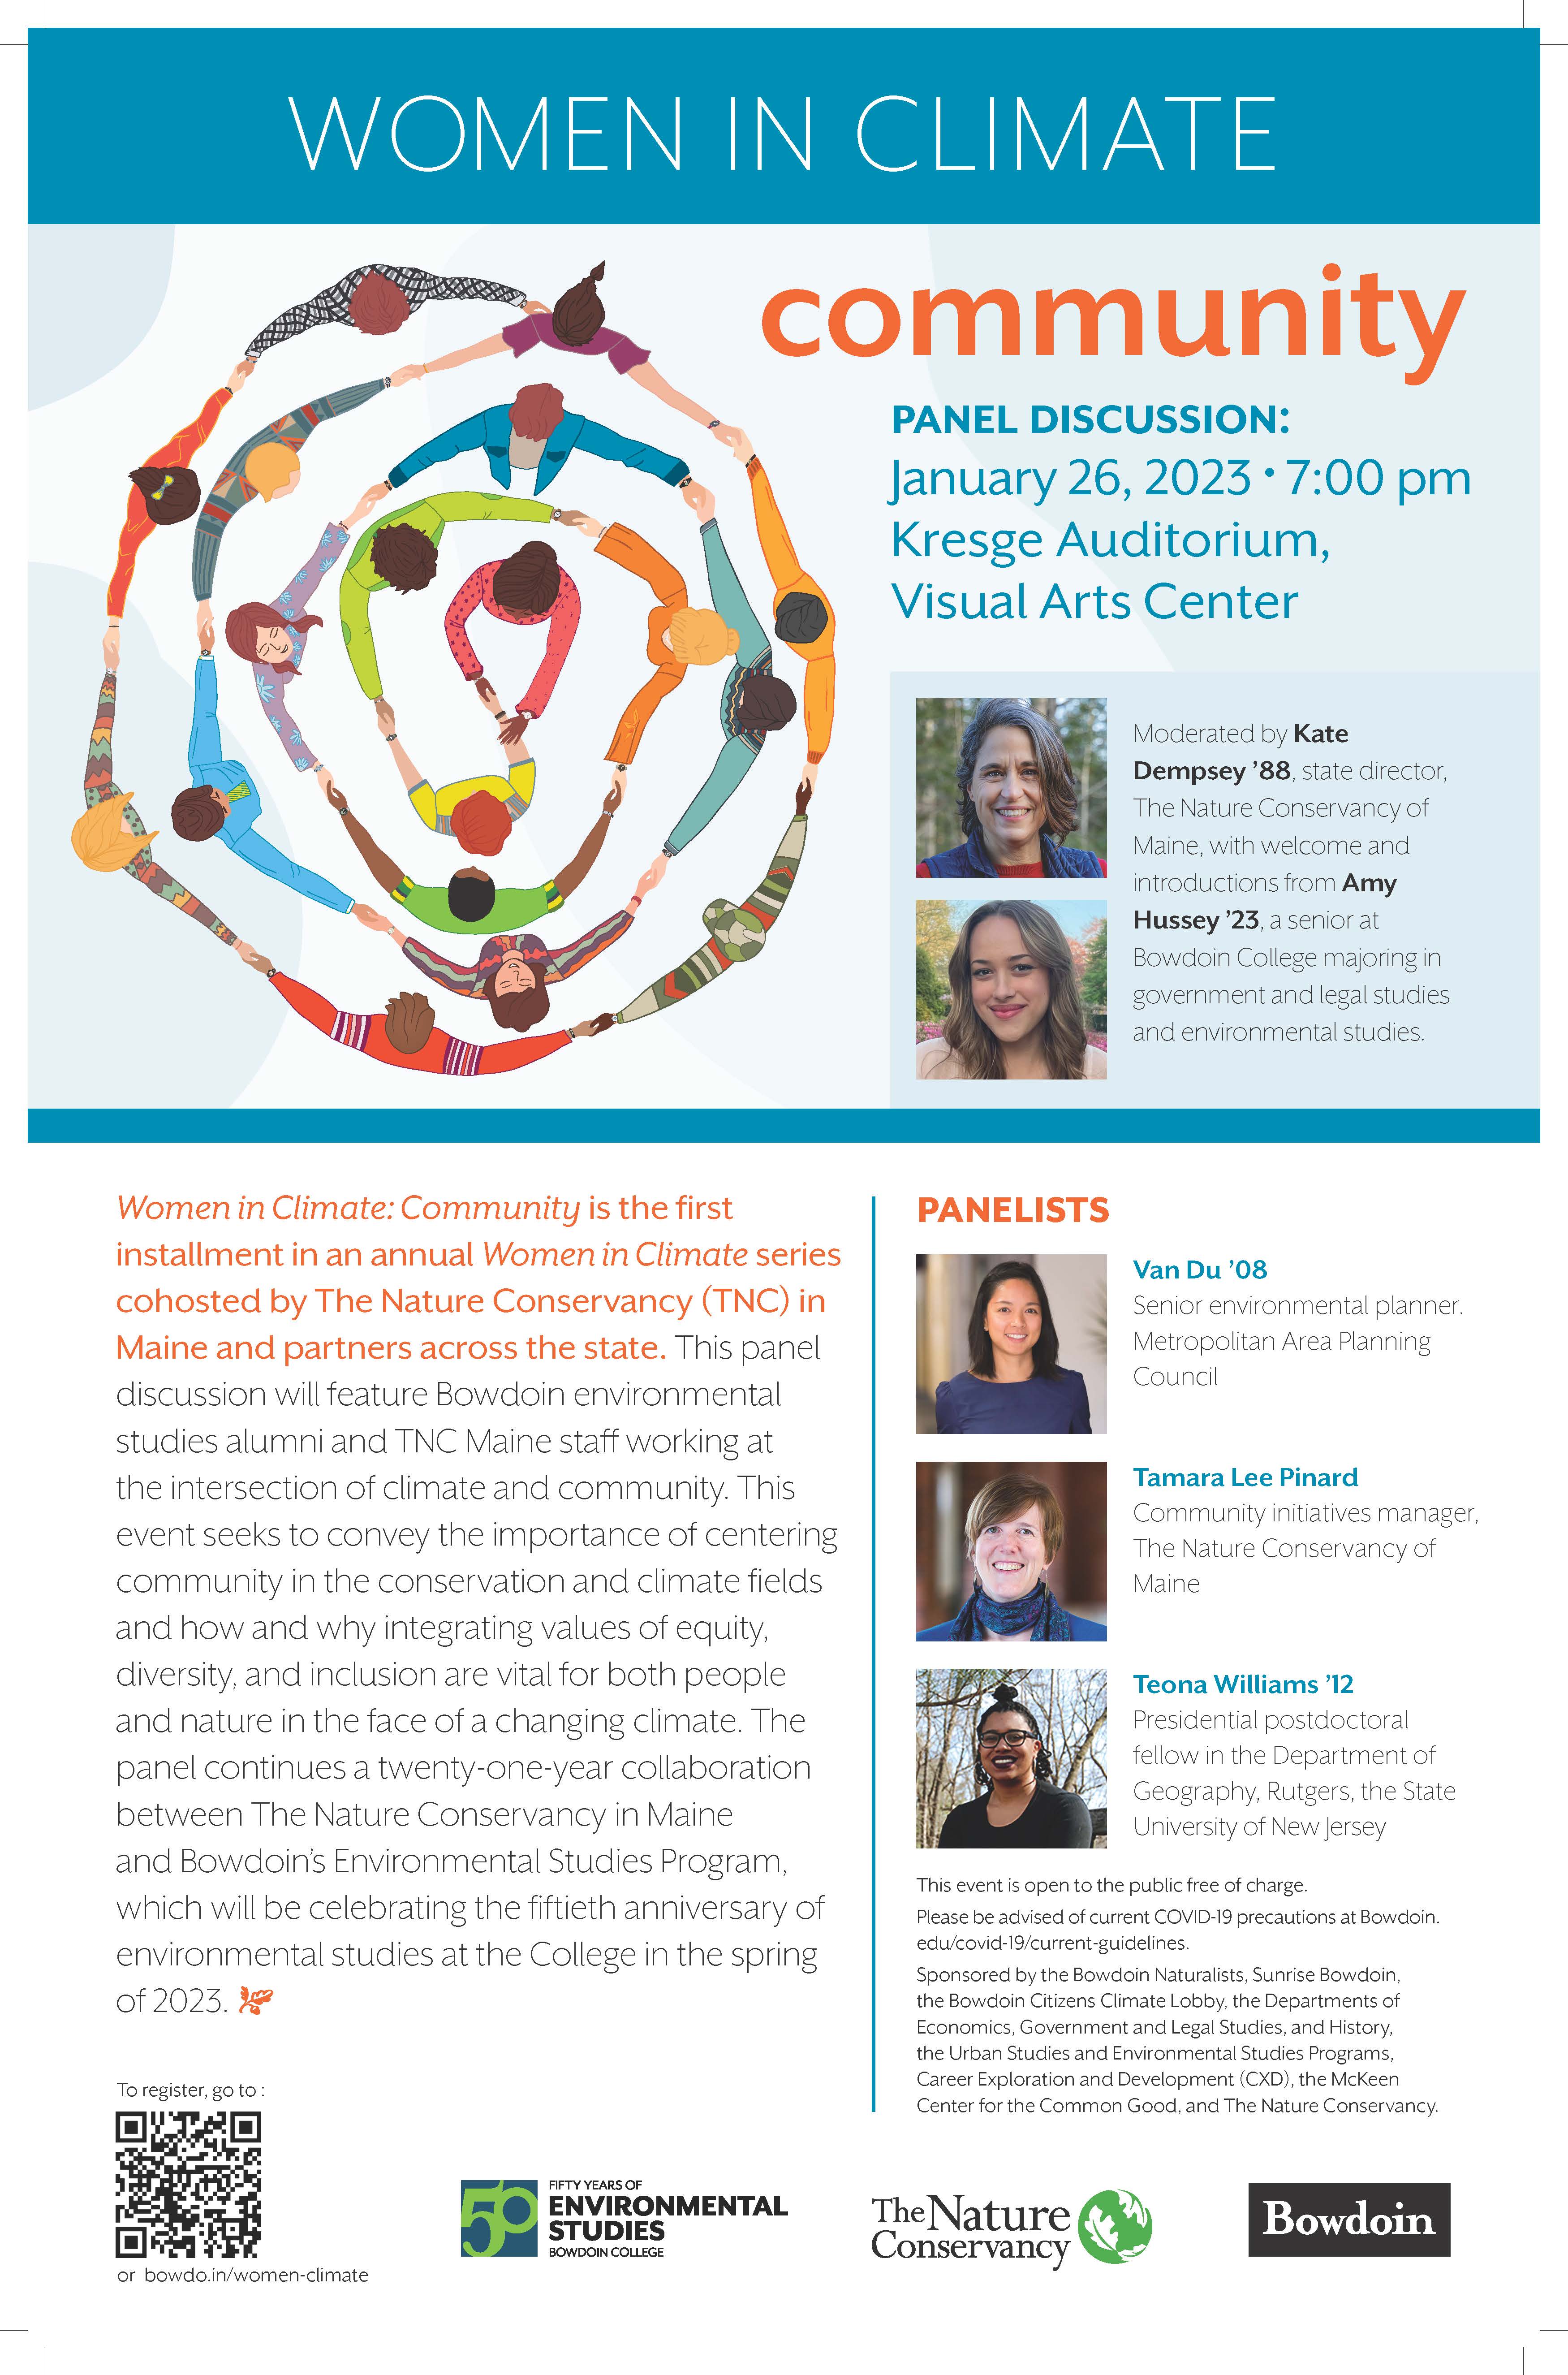 Women in Climate: Community event poster